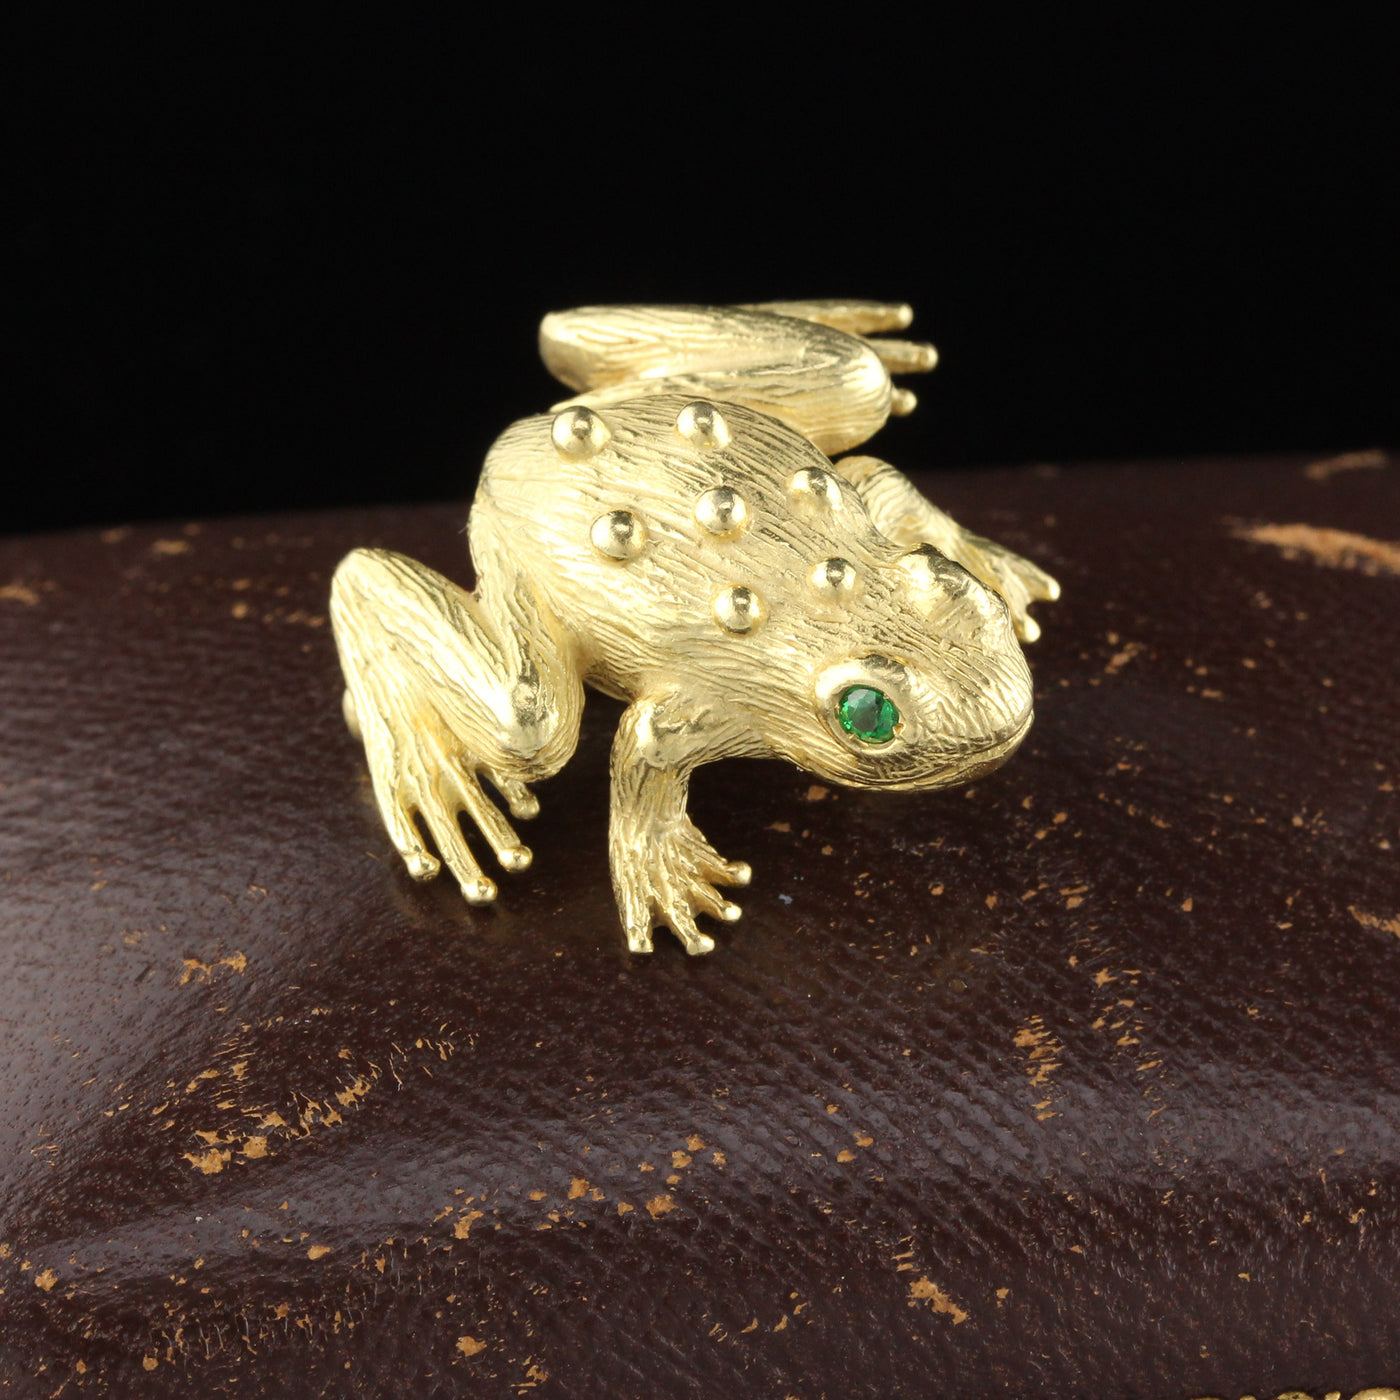 Vintage Estate 18K Yellow Gold Emerald Frog Pin - The Antique Parlour